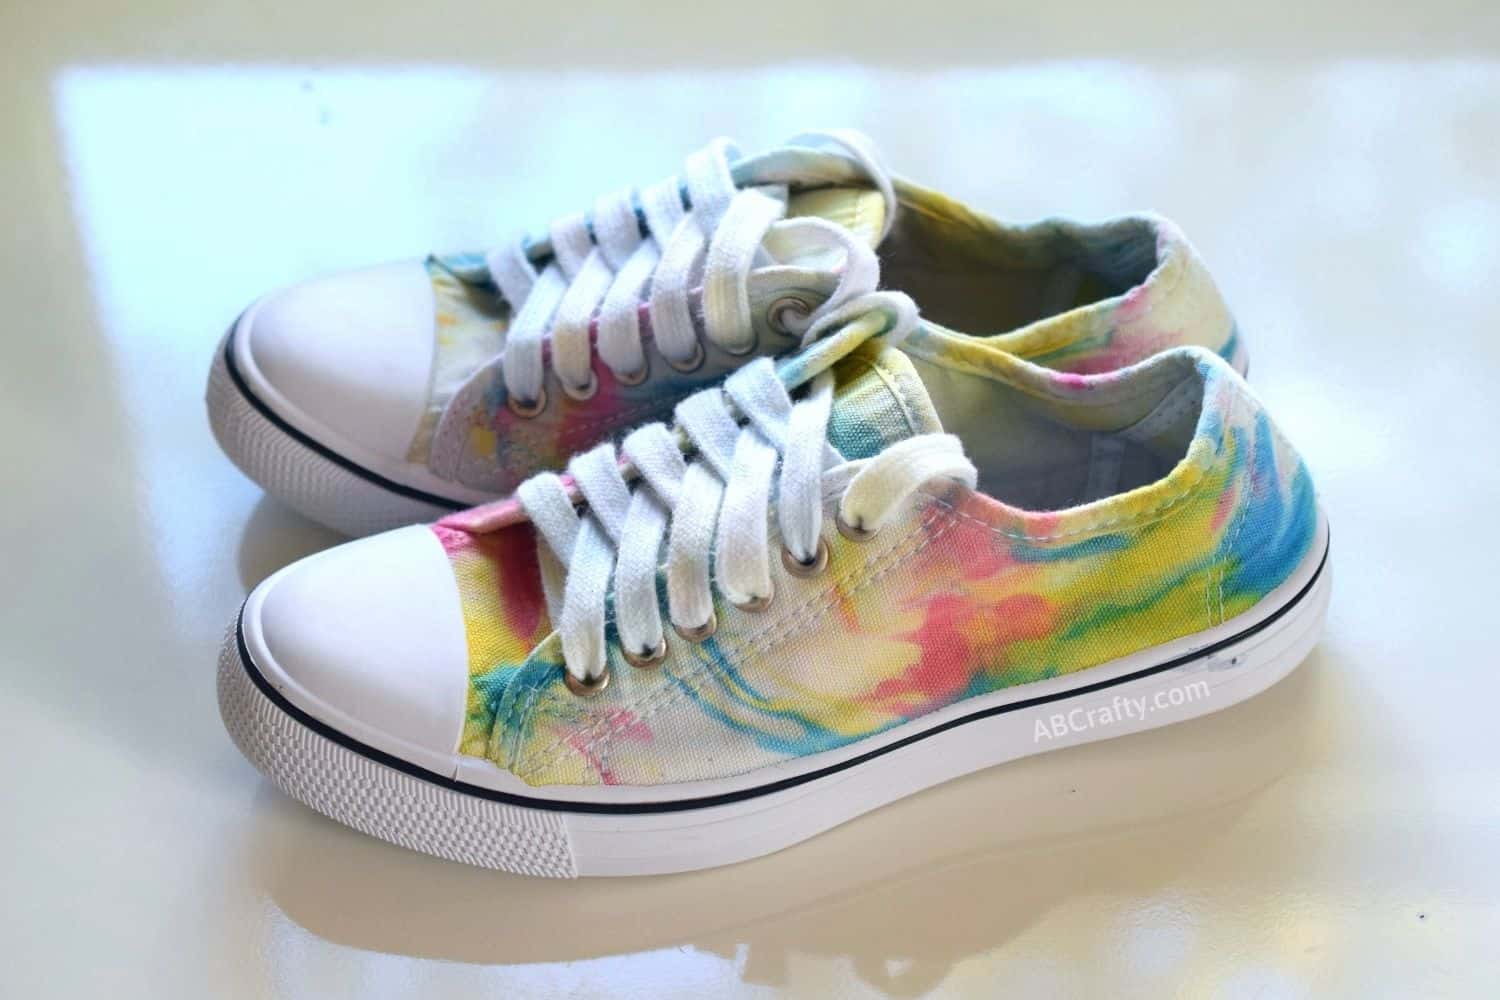 Marble Tie Dye Shoes - how to Marble Tie Dye - One CrafDIY Girl